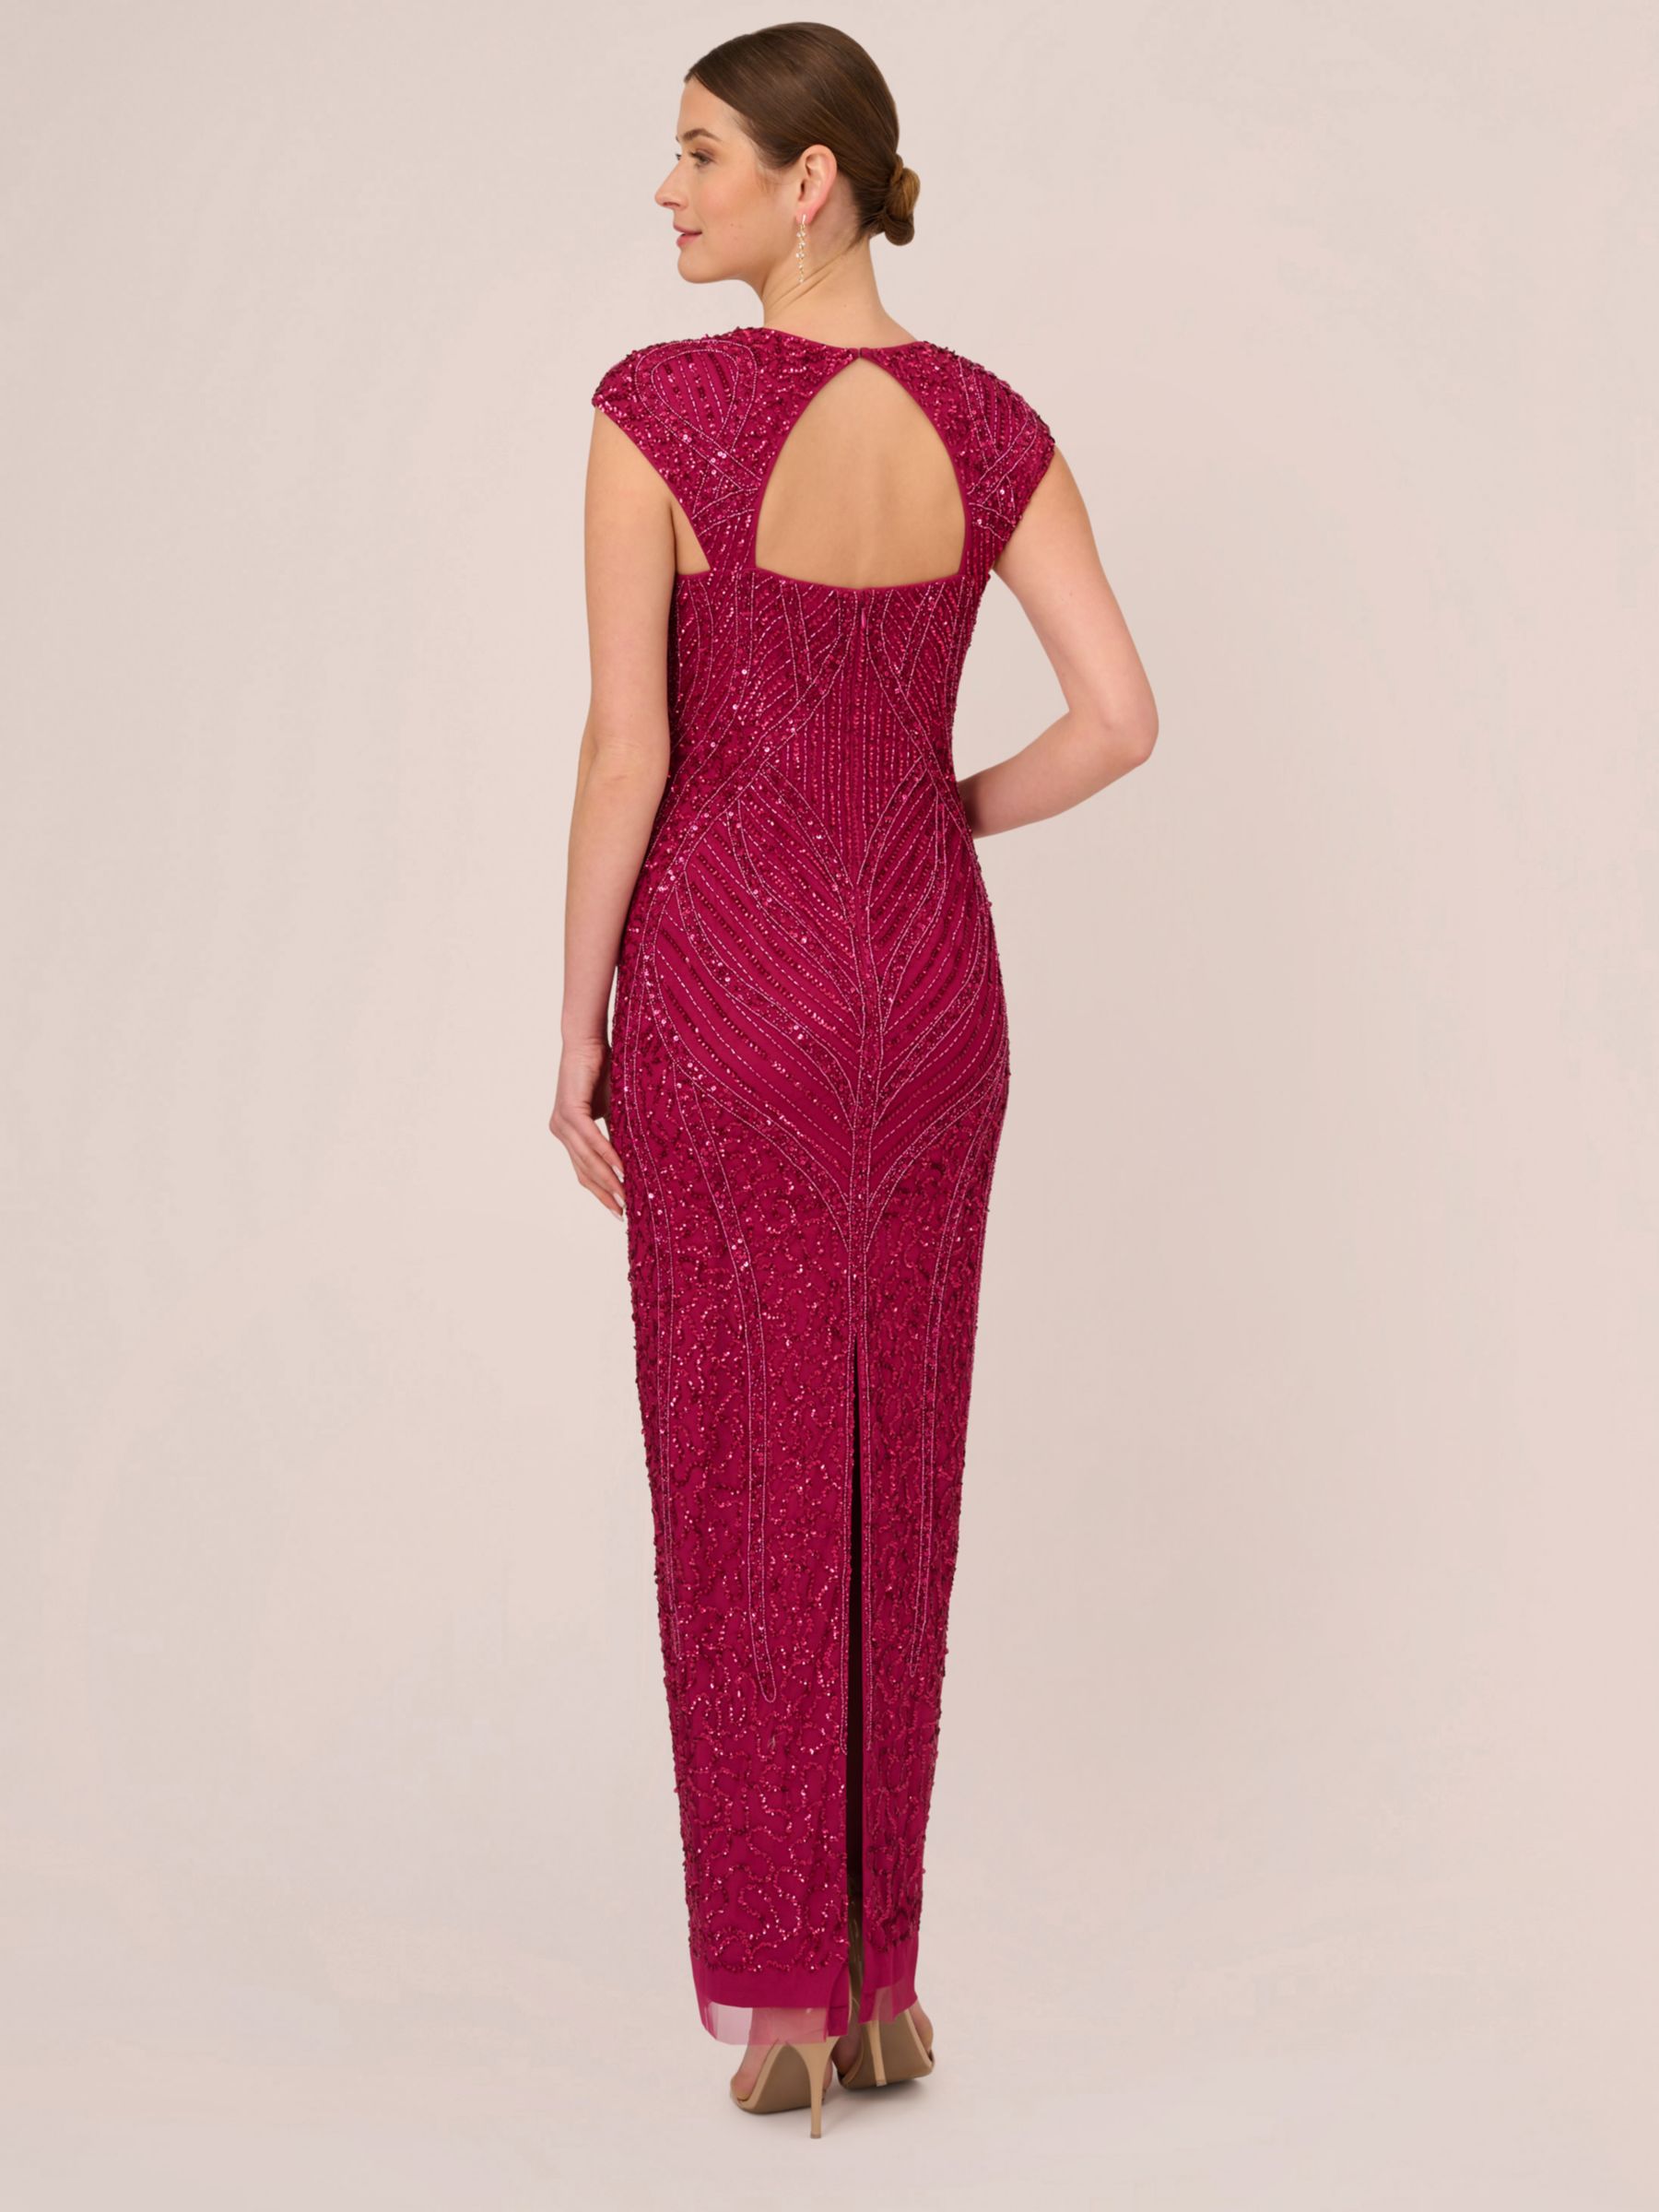 Buy Adrianna Papell Beaded Column Gown Dress, Magenta Online at johnlewis.com